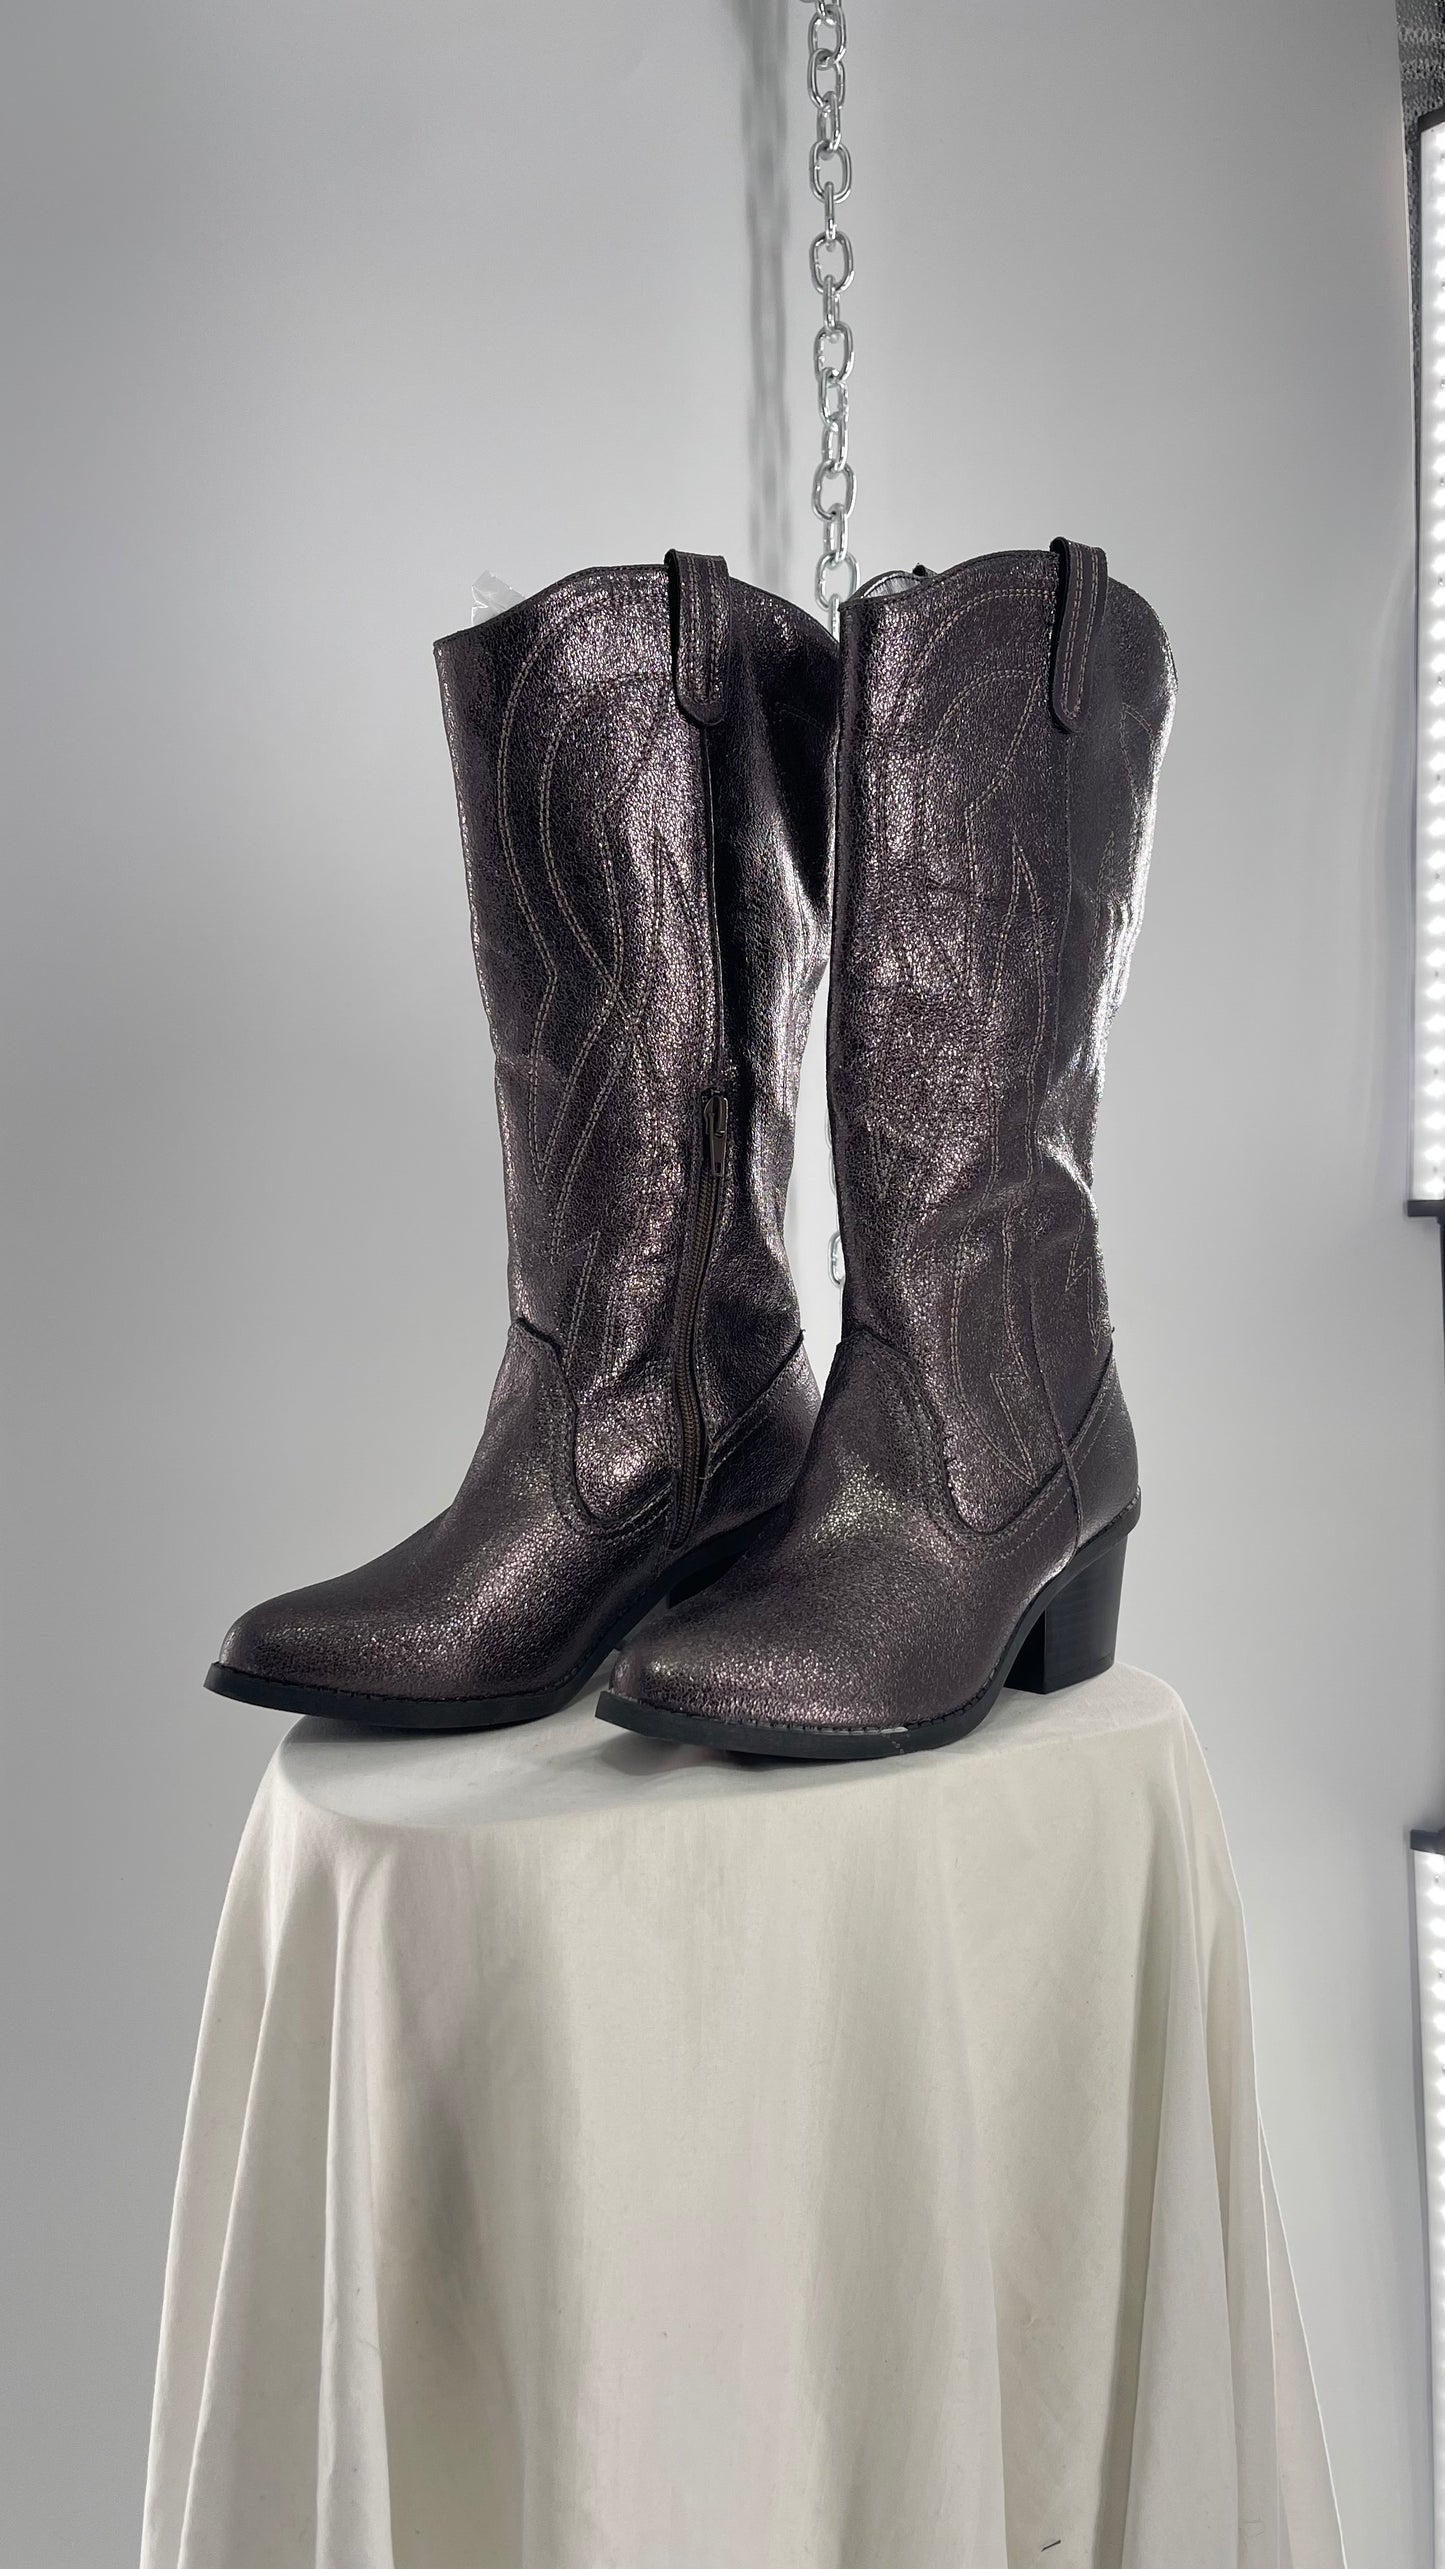 Vintage POP Metallic Silver Knee High Cowgirl Boots with Pointed Toe (6)